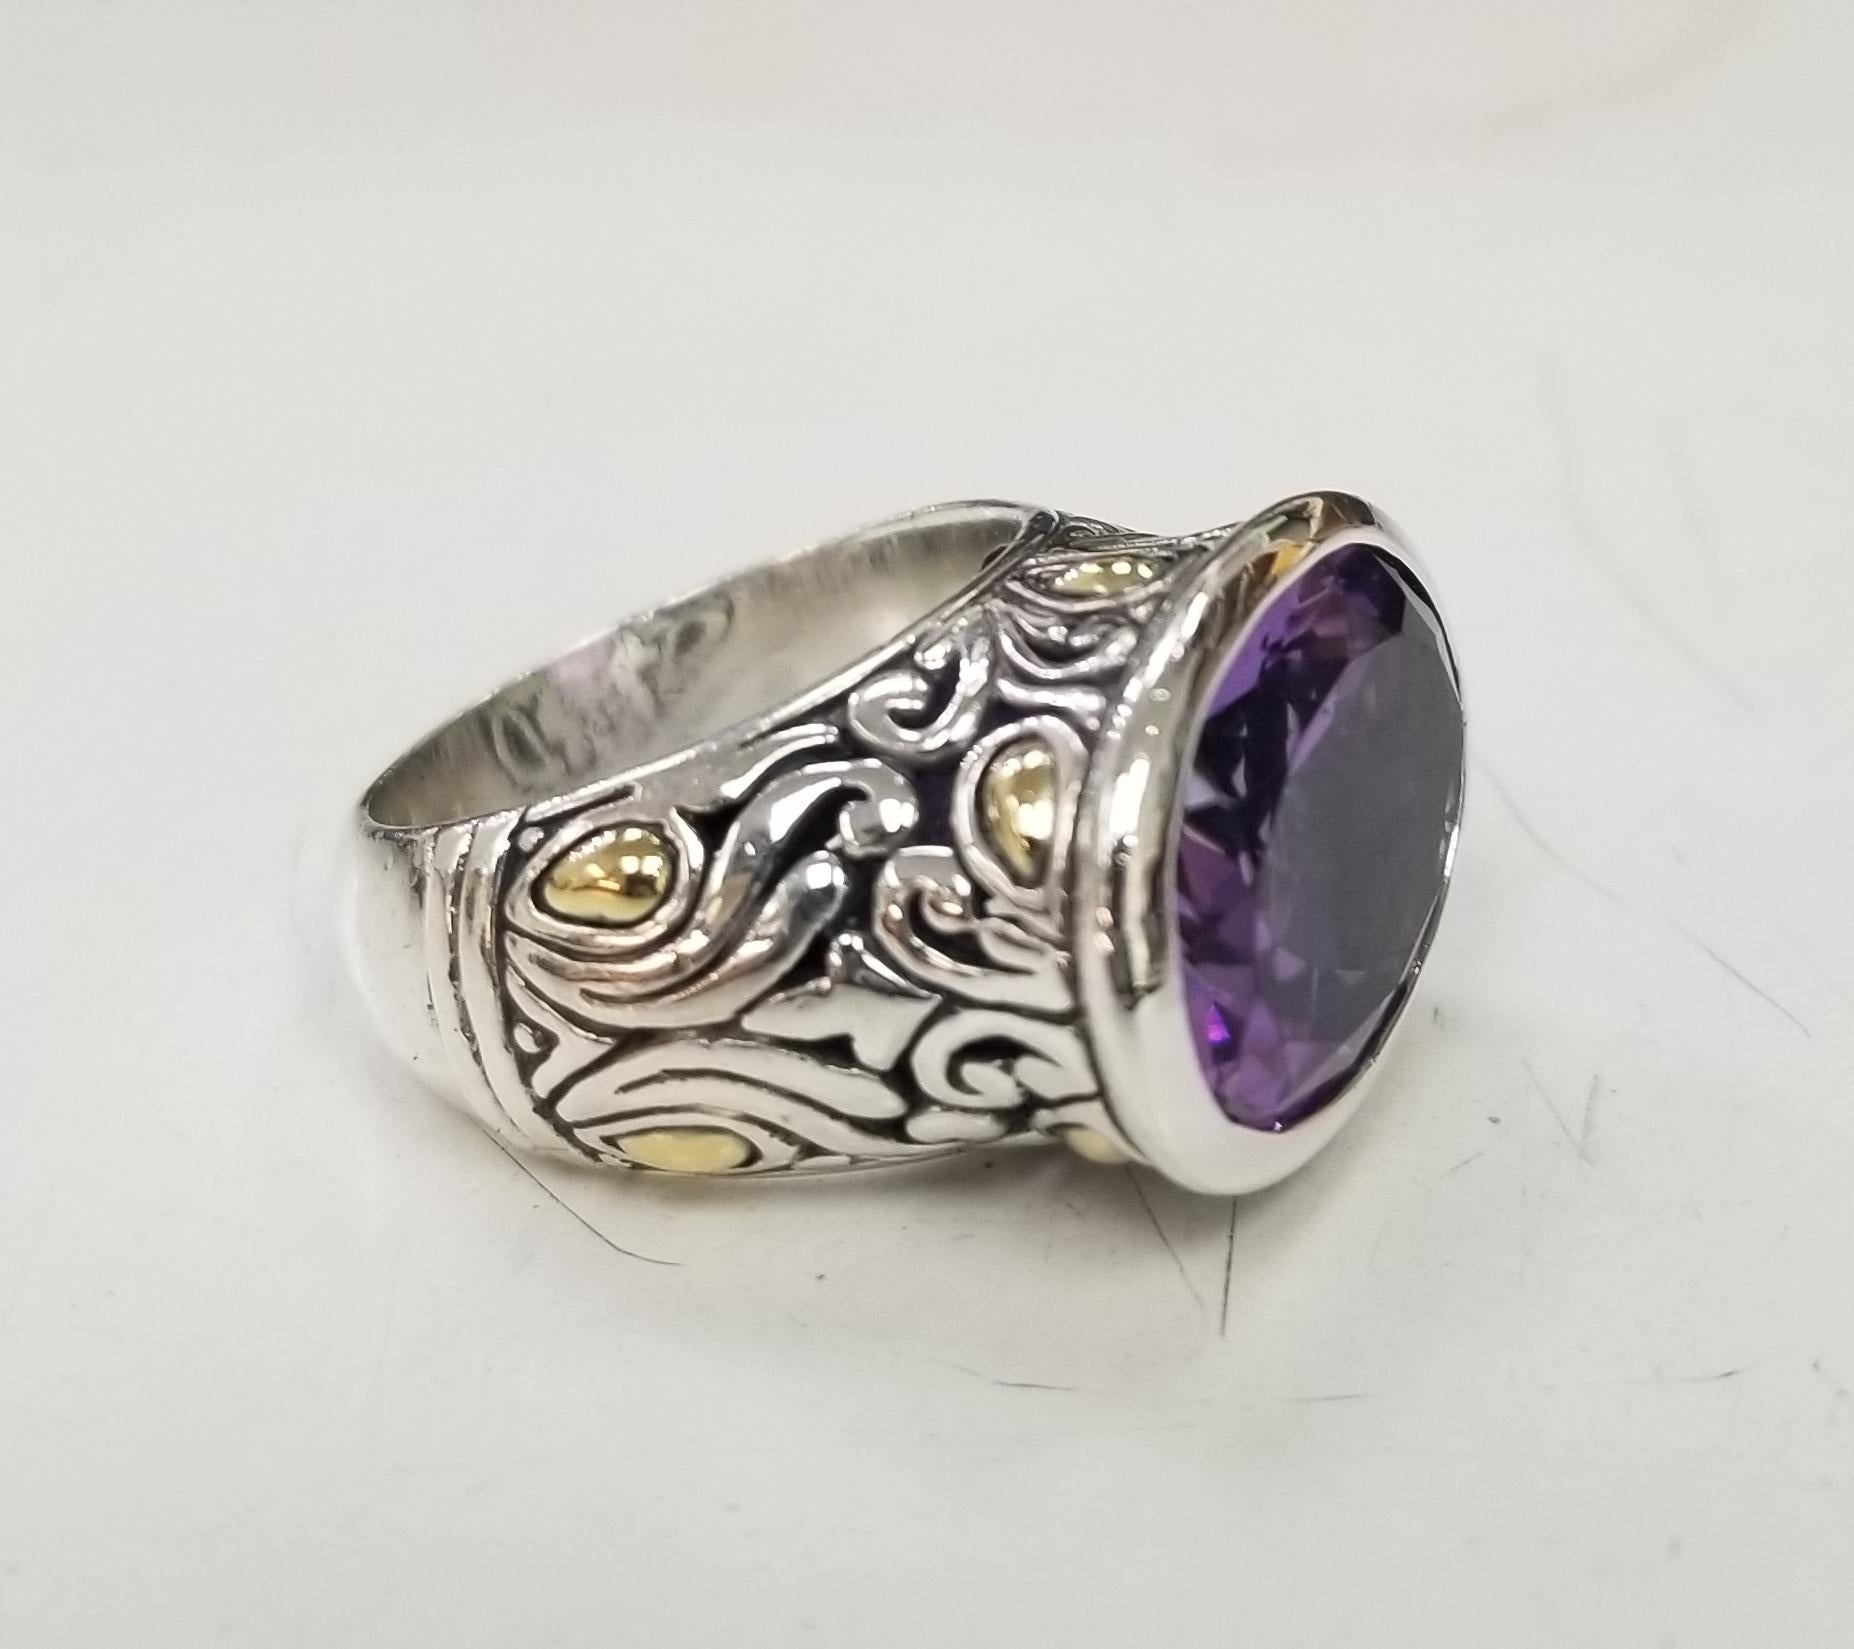 Handmade Sterling Silver and 18k accents, Bezel set Amethyst  Ring, containing 1 oval amethyst of  gem quality weighing approximately 16.00ct.s (17mmx 13mm) ring is a size 7